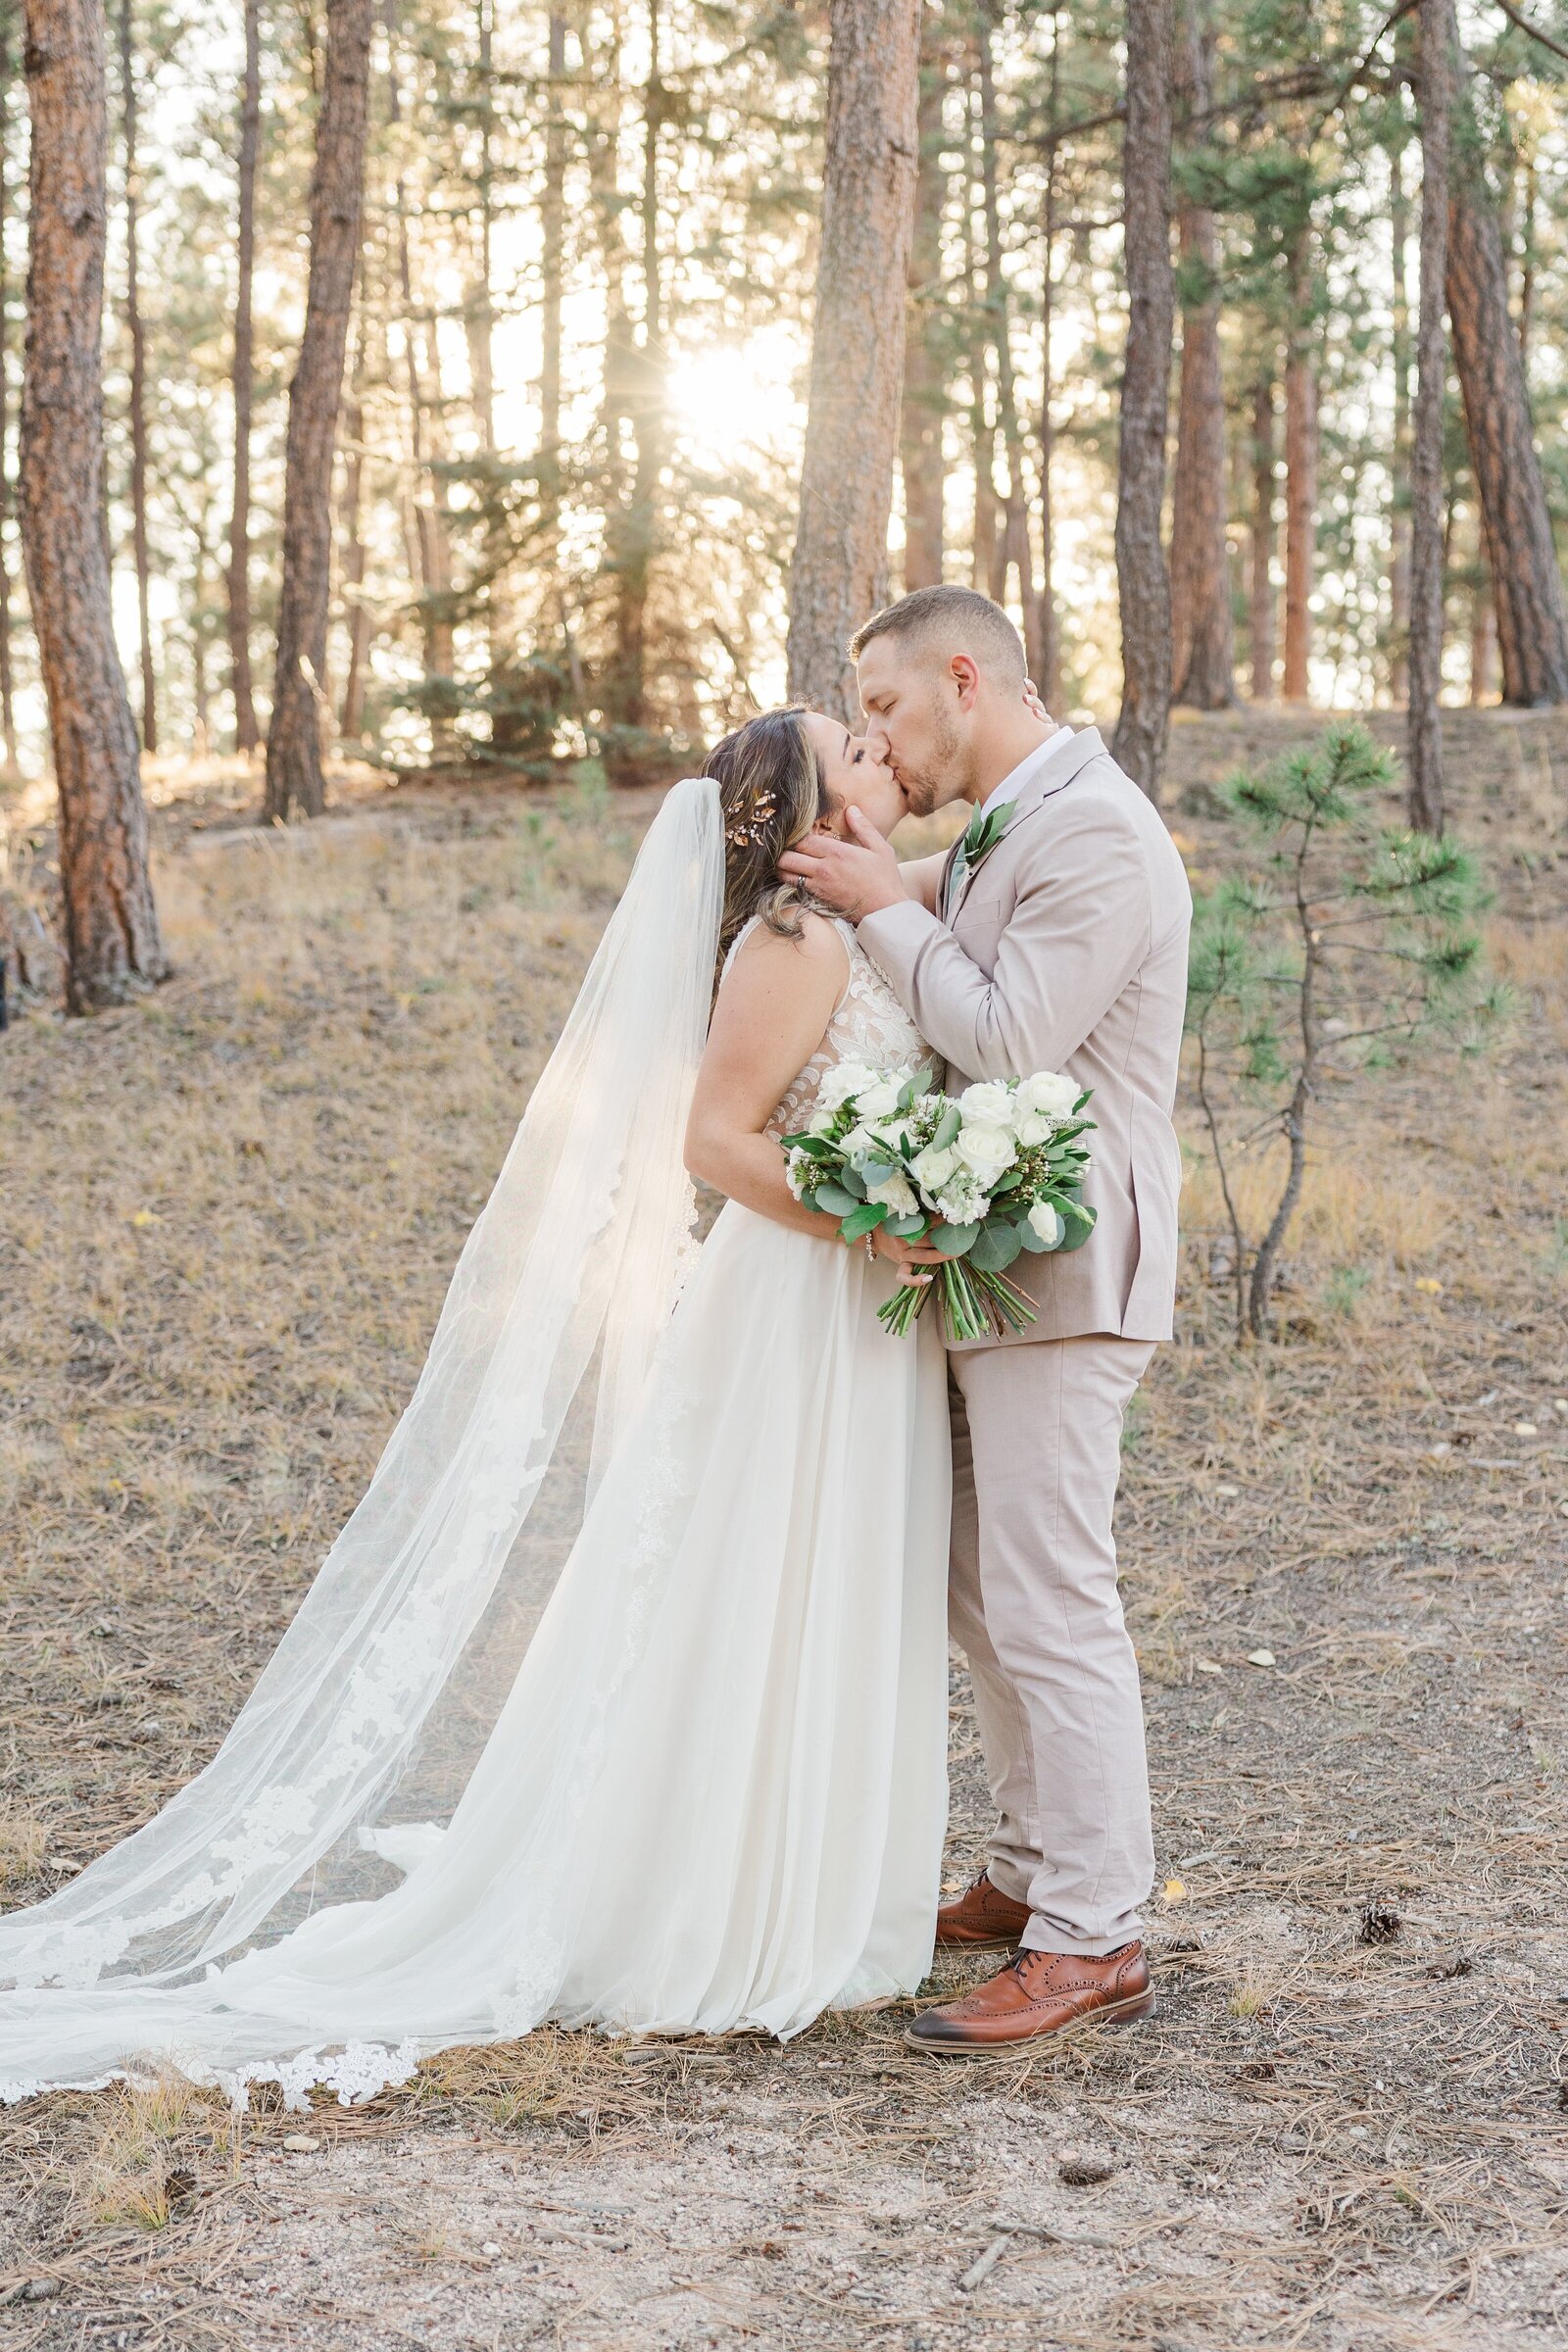 Celebrate your love with an intimate wedding ceremony in the beautiful outdoor settings of Colorado, expertly captured by Sam Immer Photography. Our personalized approach and keen eye for detail will ensure your special day is perfect.